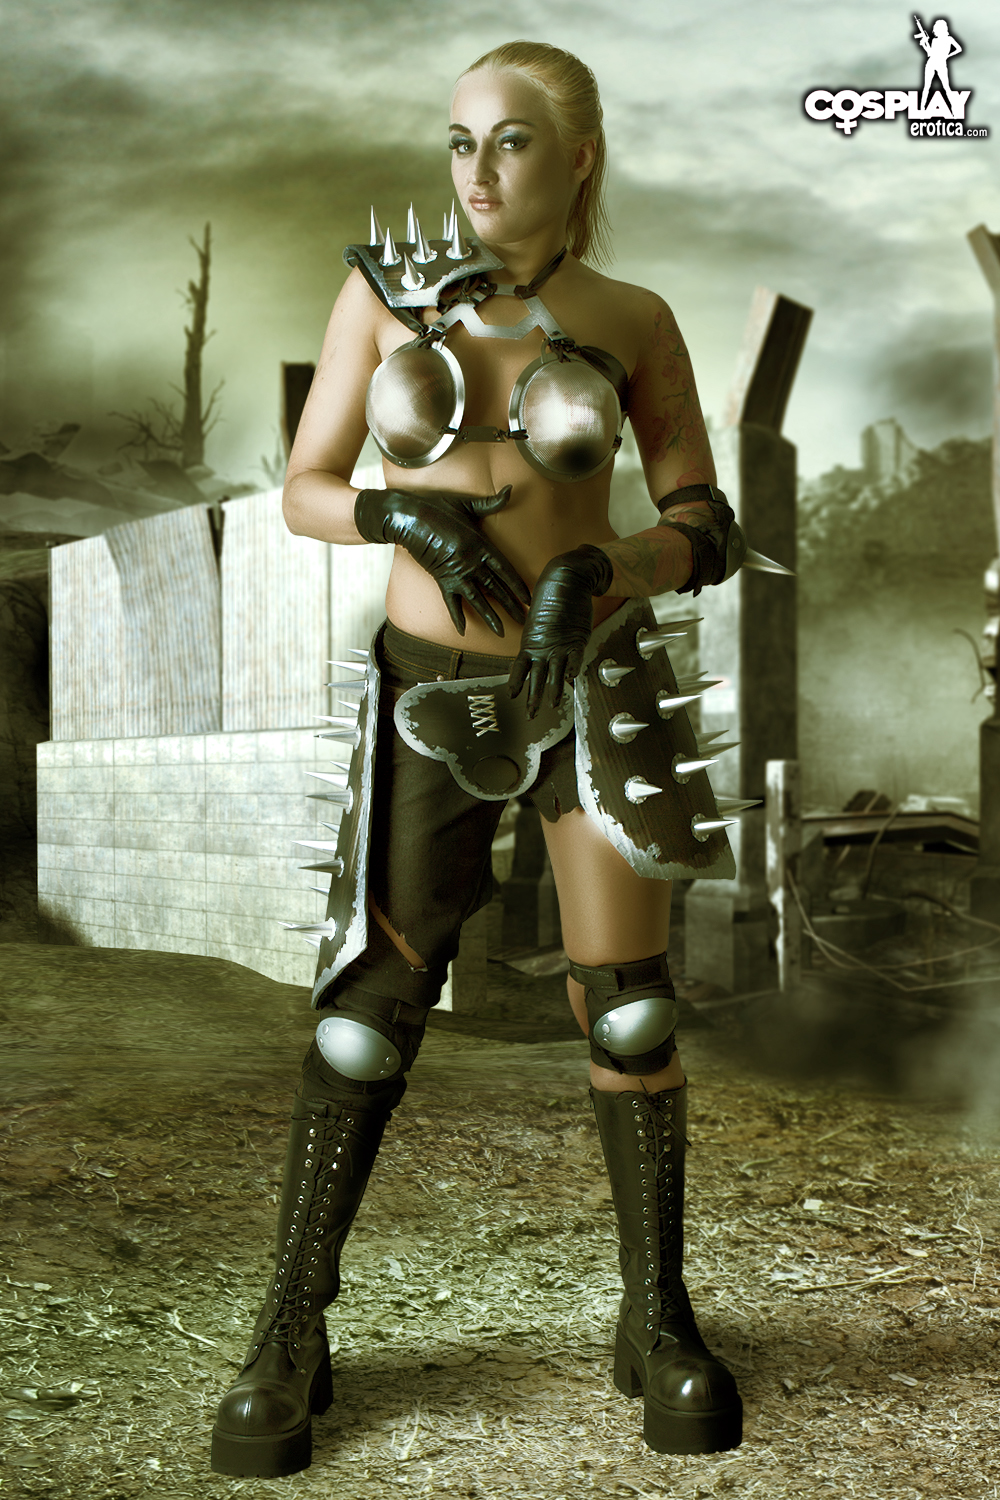 Fallout 3 Cosplay Porn - Cosplayerotica Raider Fallout Nude Cosplay | Free Hot Nude Porn Pic Gallery